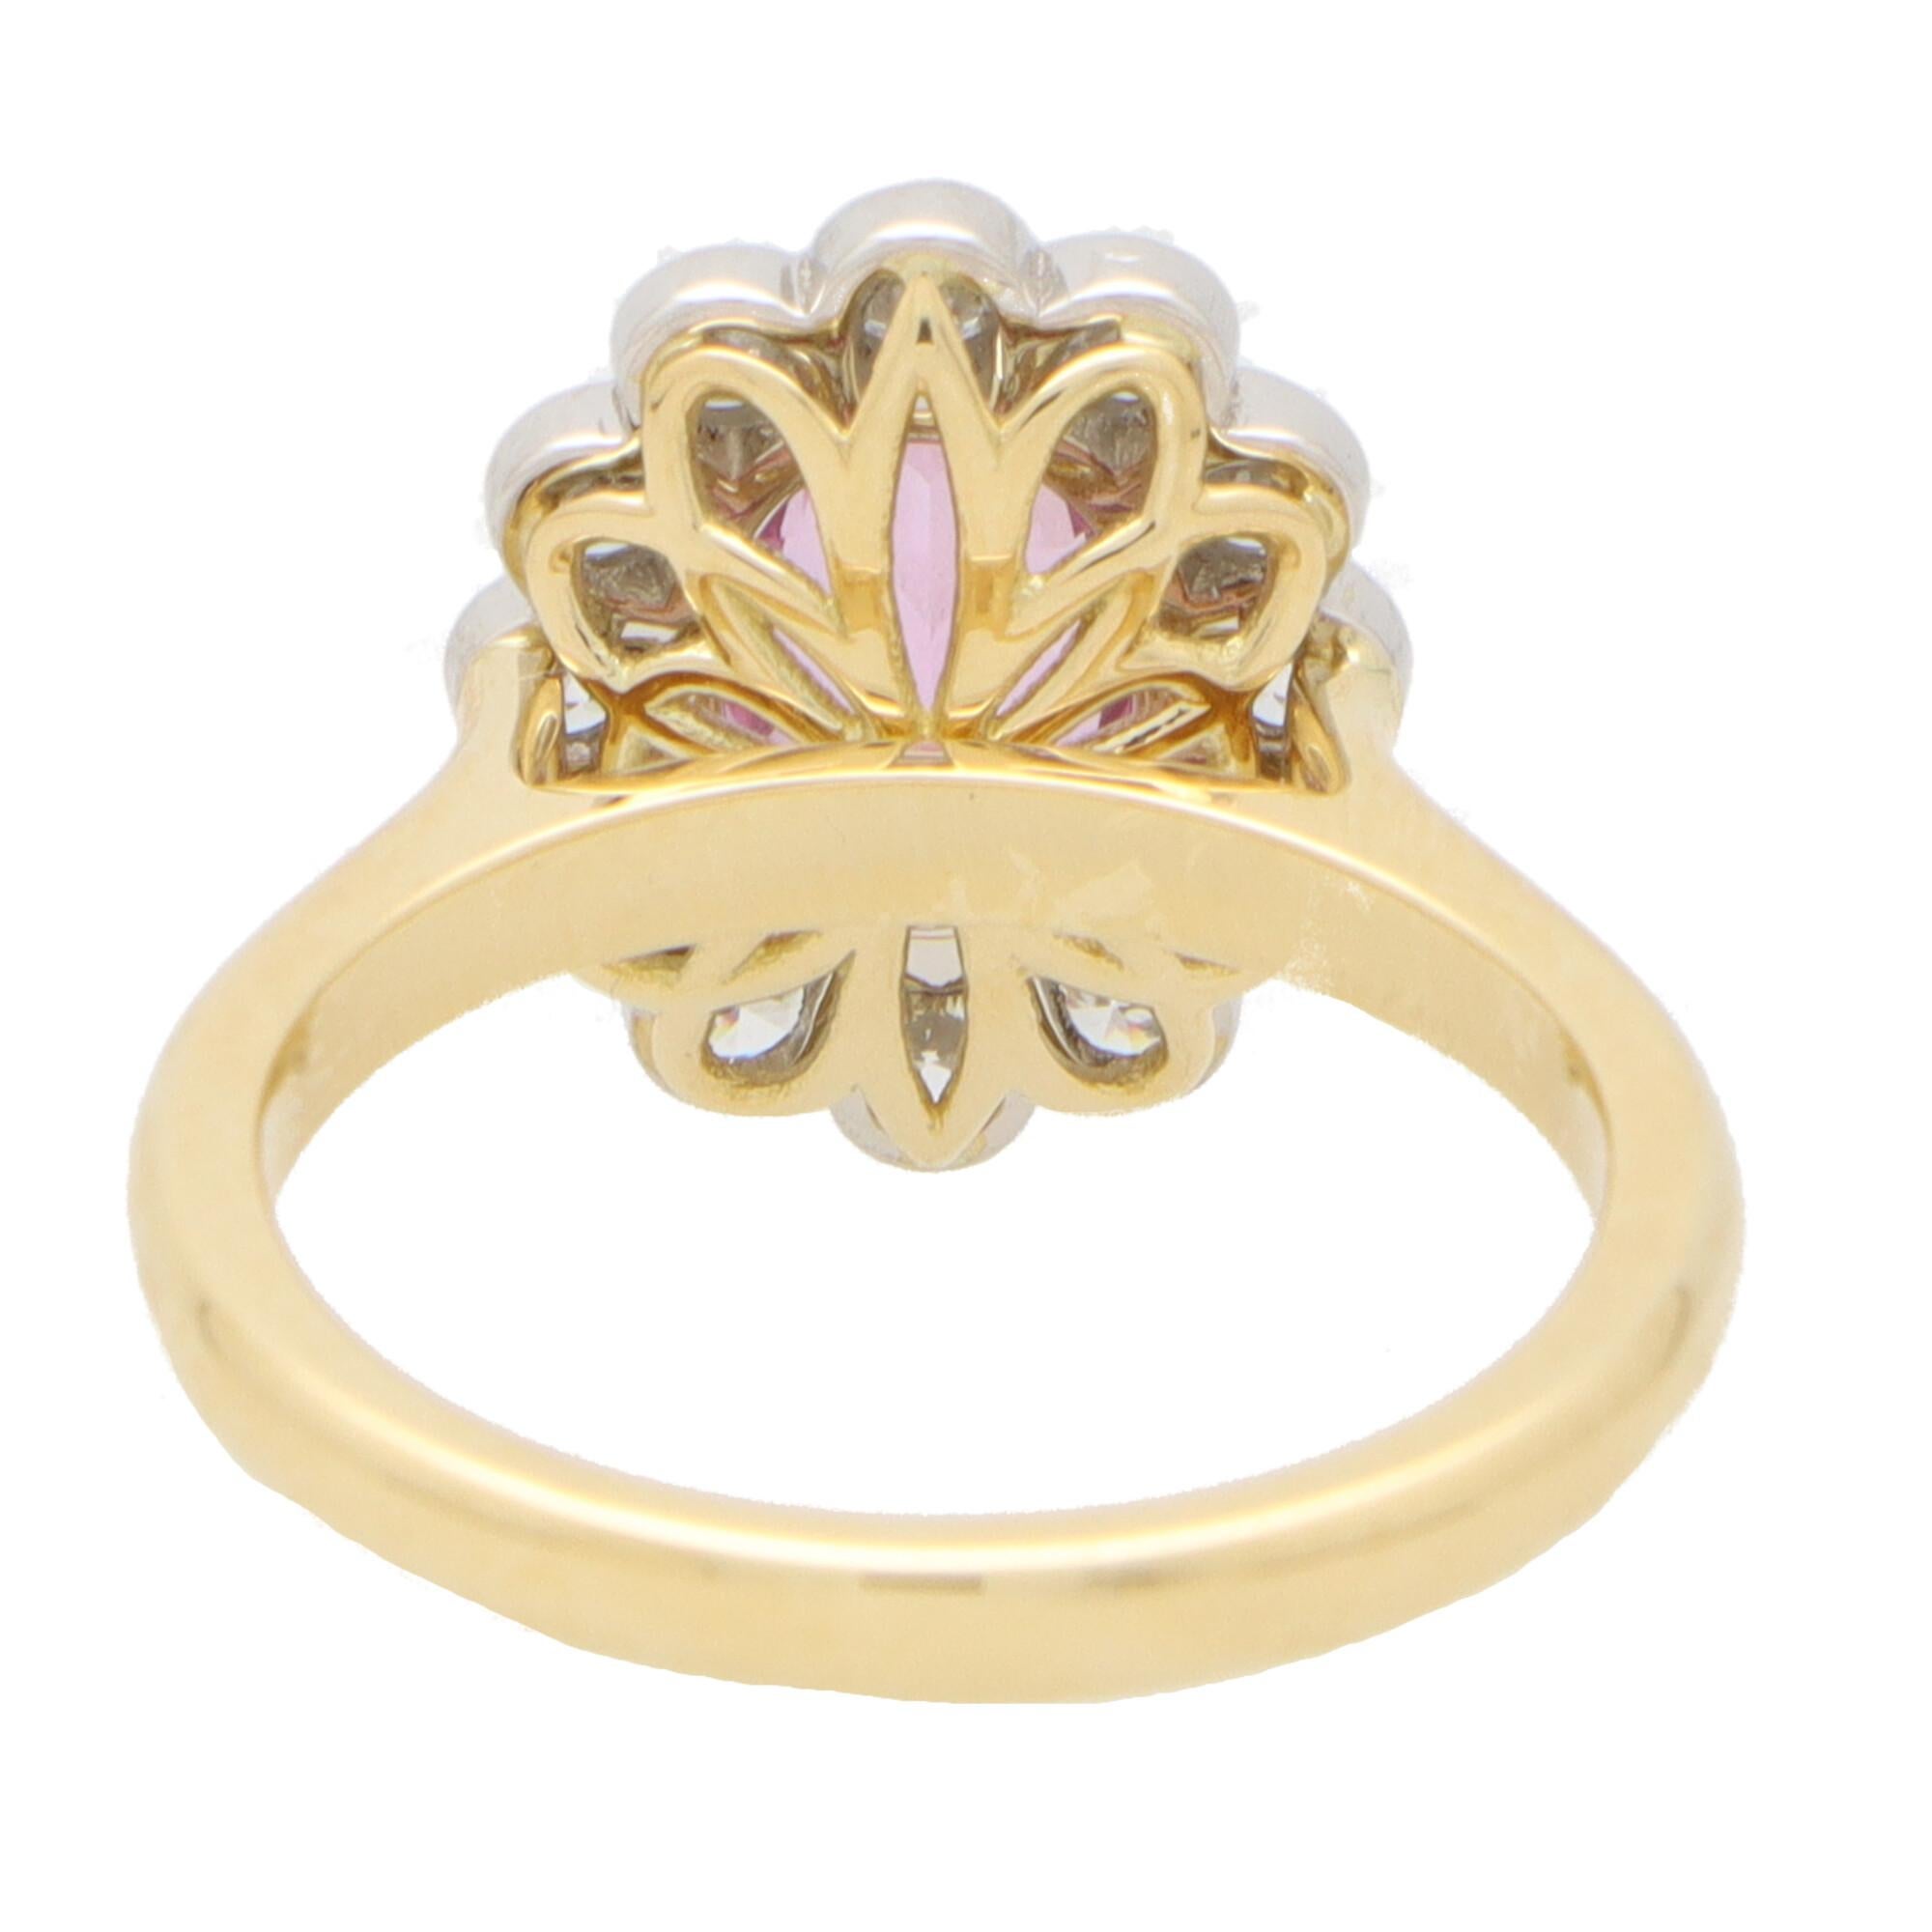 Contemporary Pink Sapphire and Diamond Floral Cluster Ring in 18k Gold 1